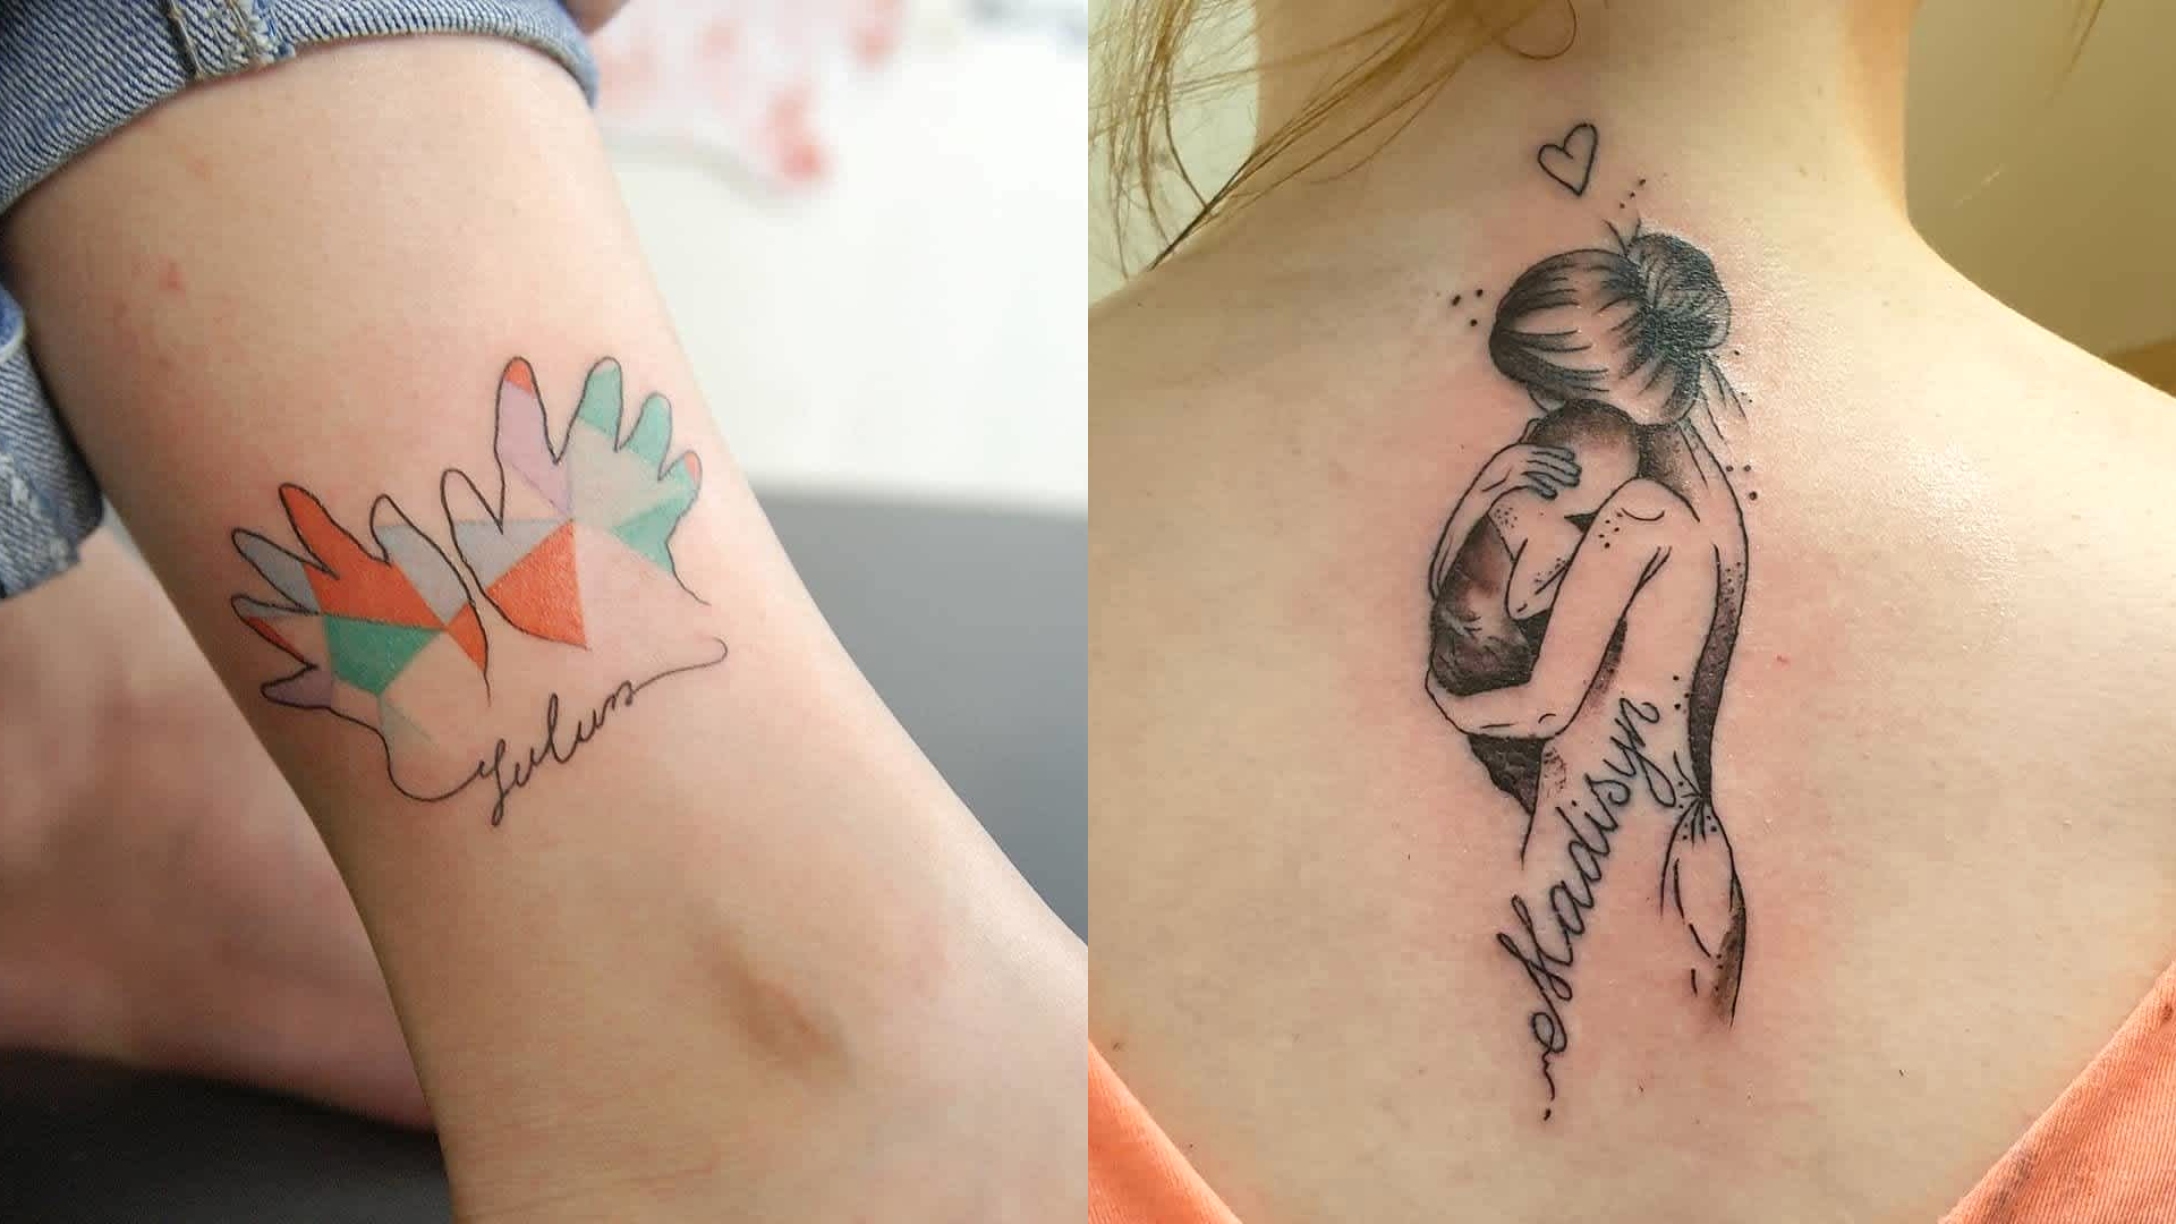 Tattoo ideas for childrens names and birthdays